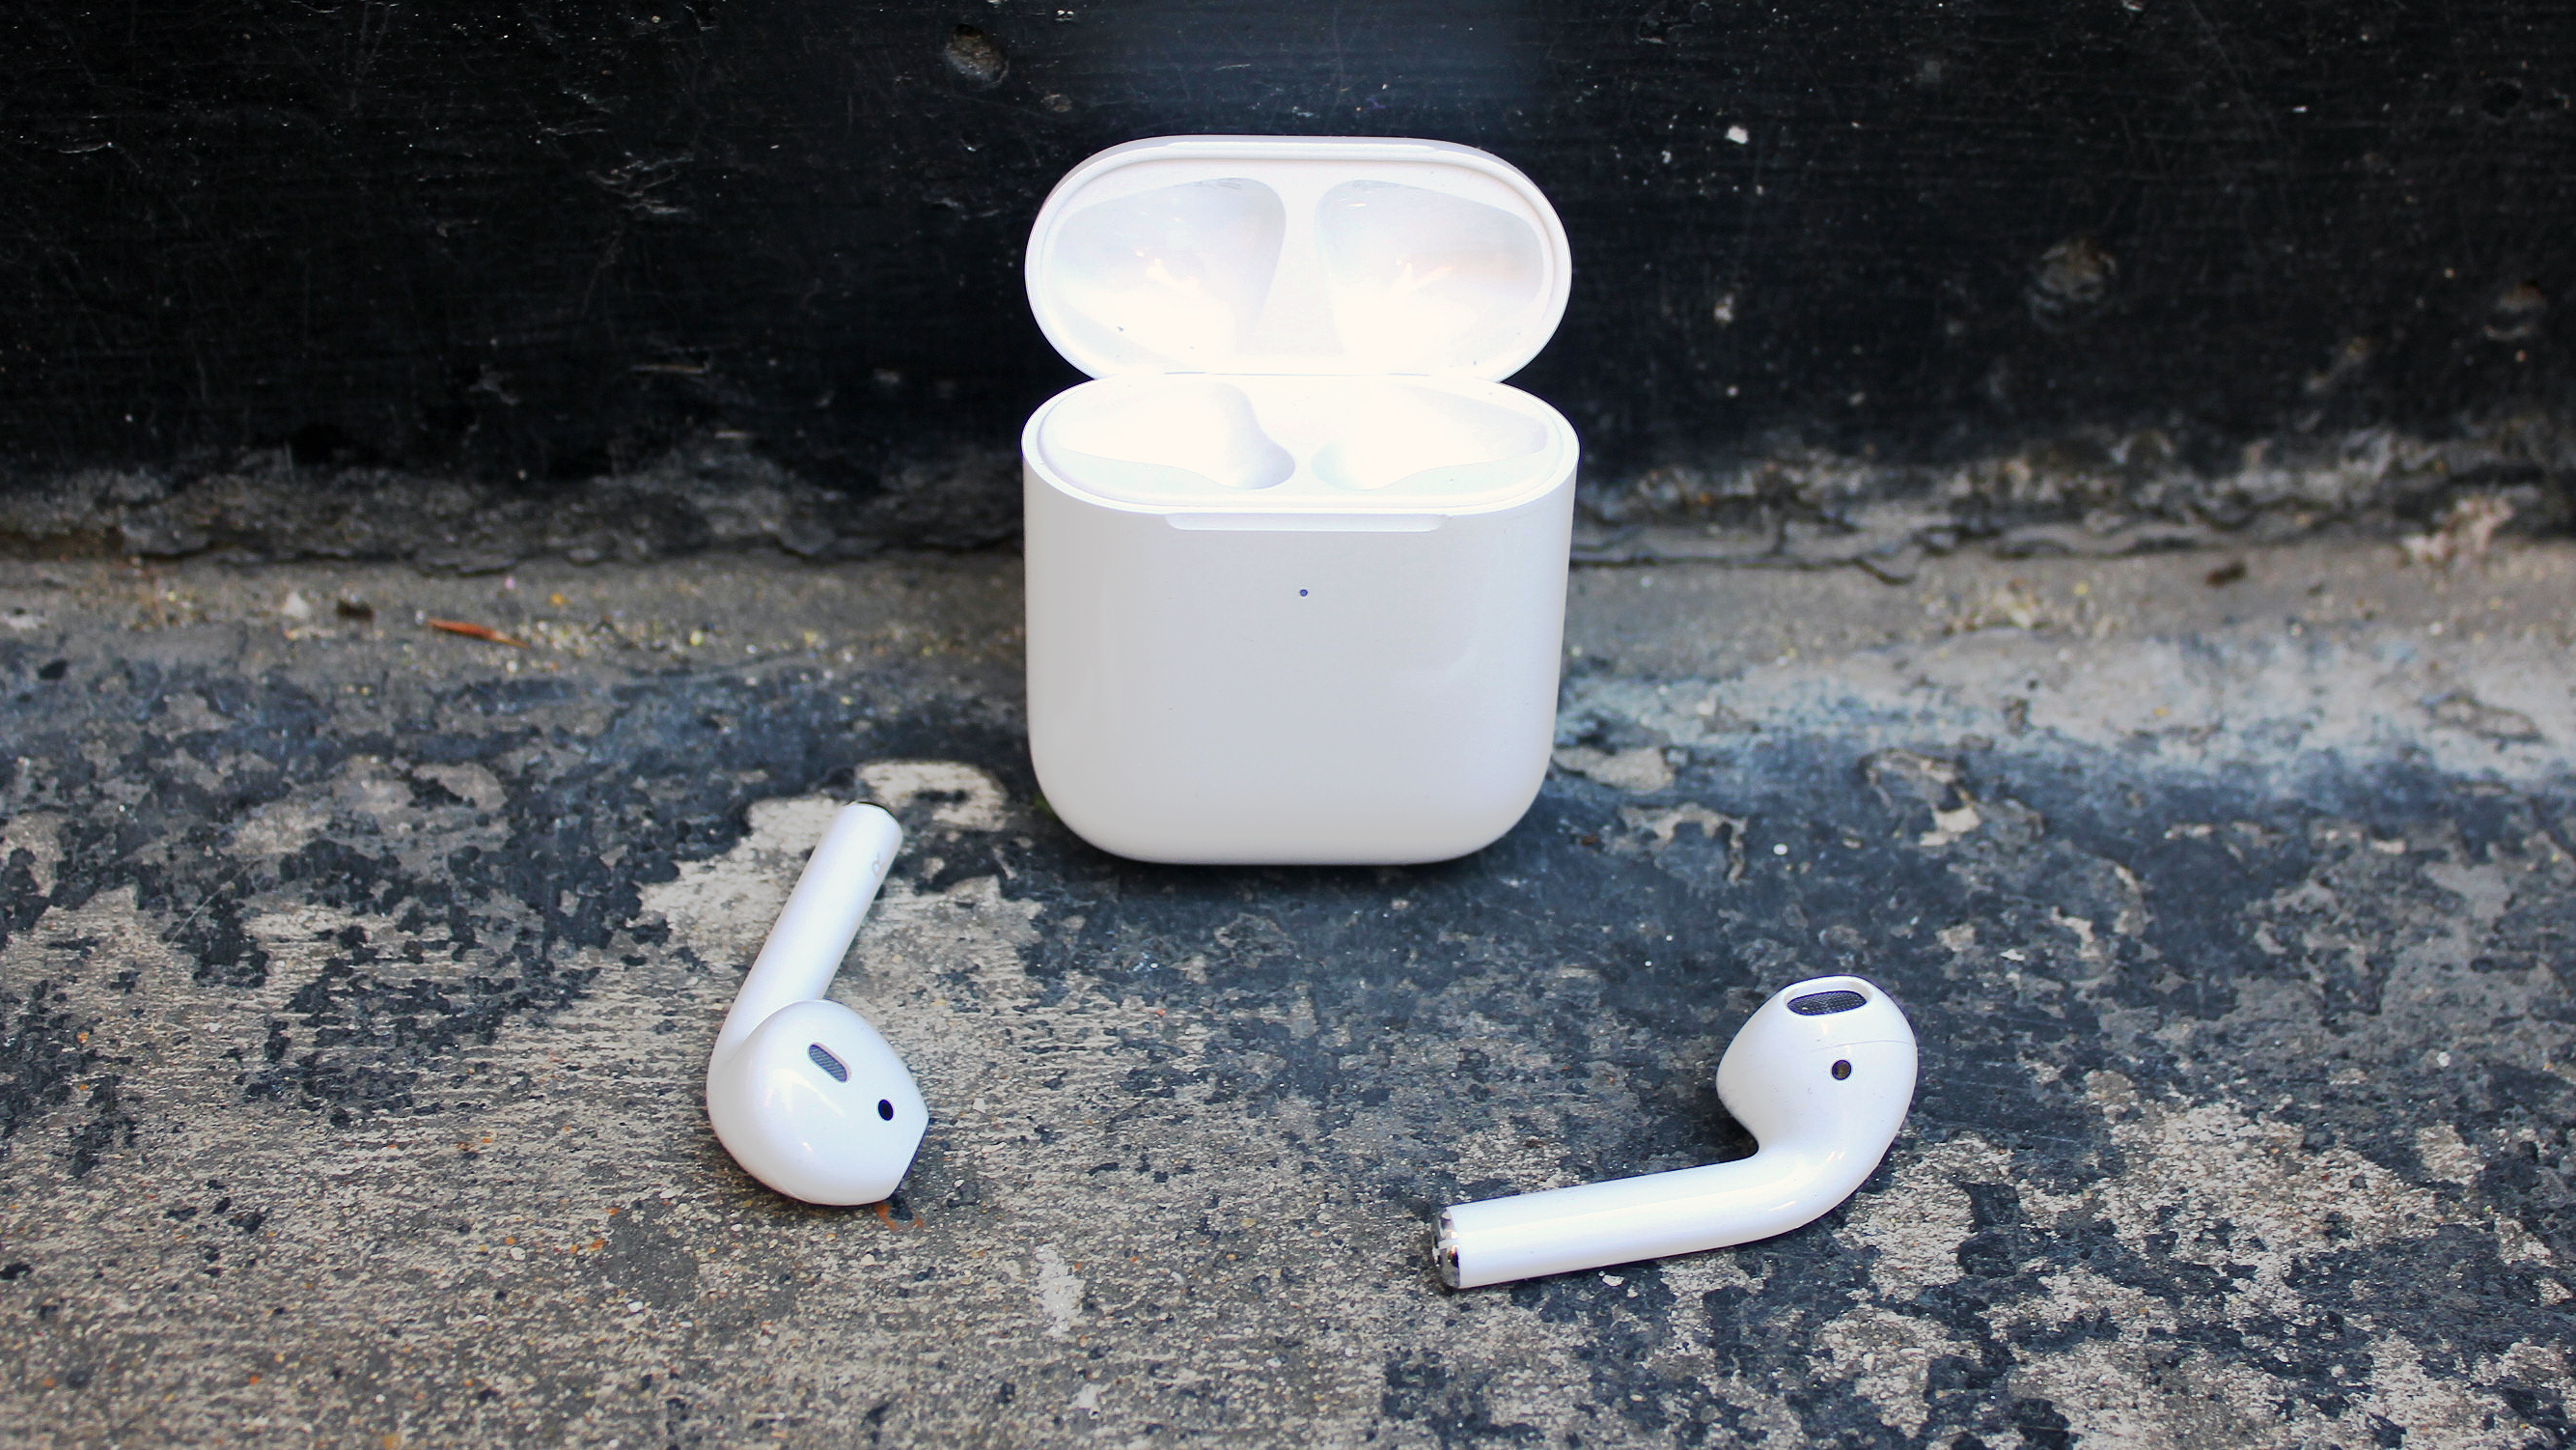 2019 Apple Airpods buds stacked in front of the charging case.